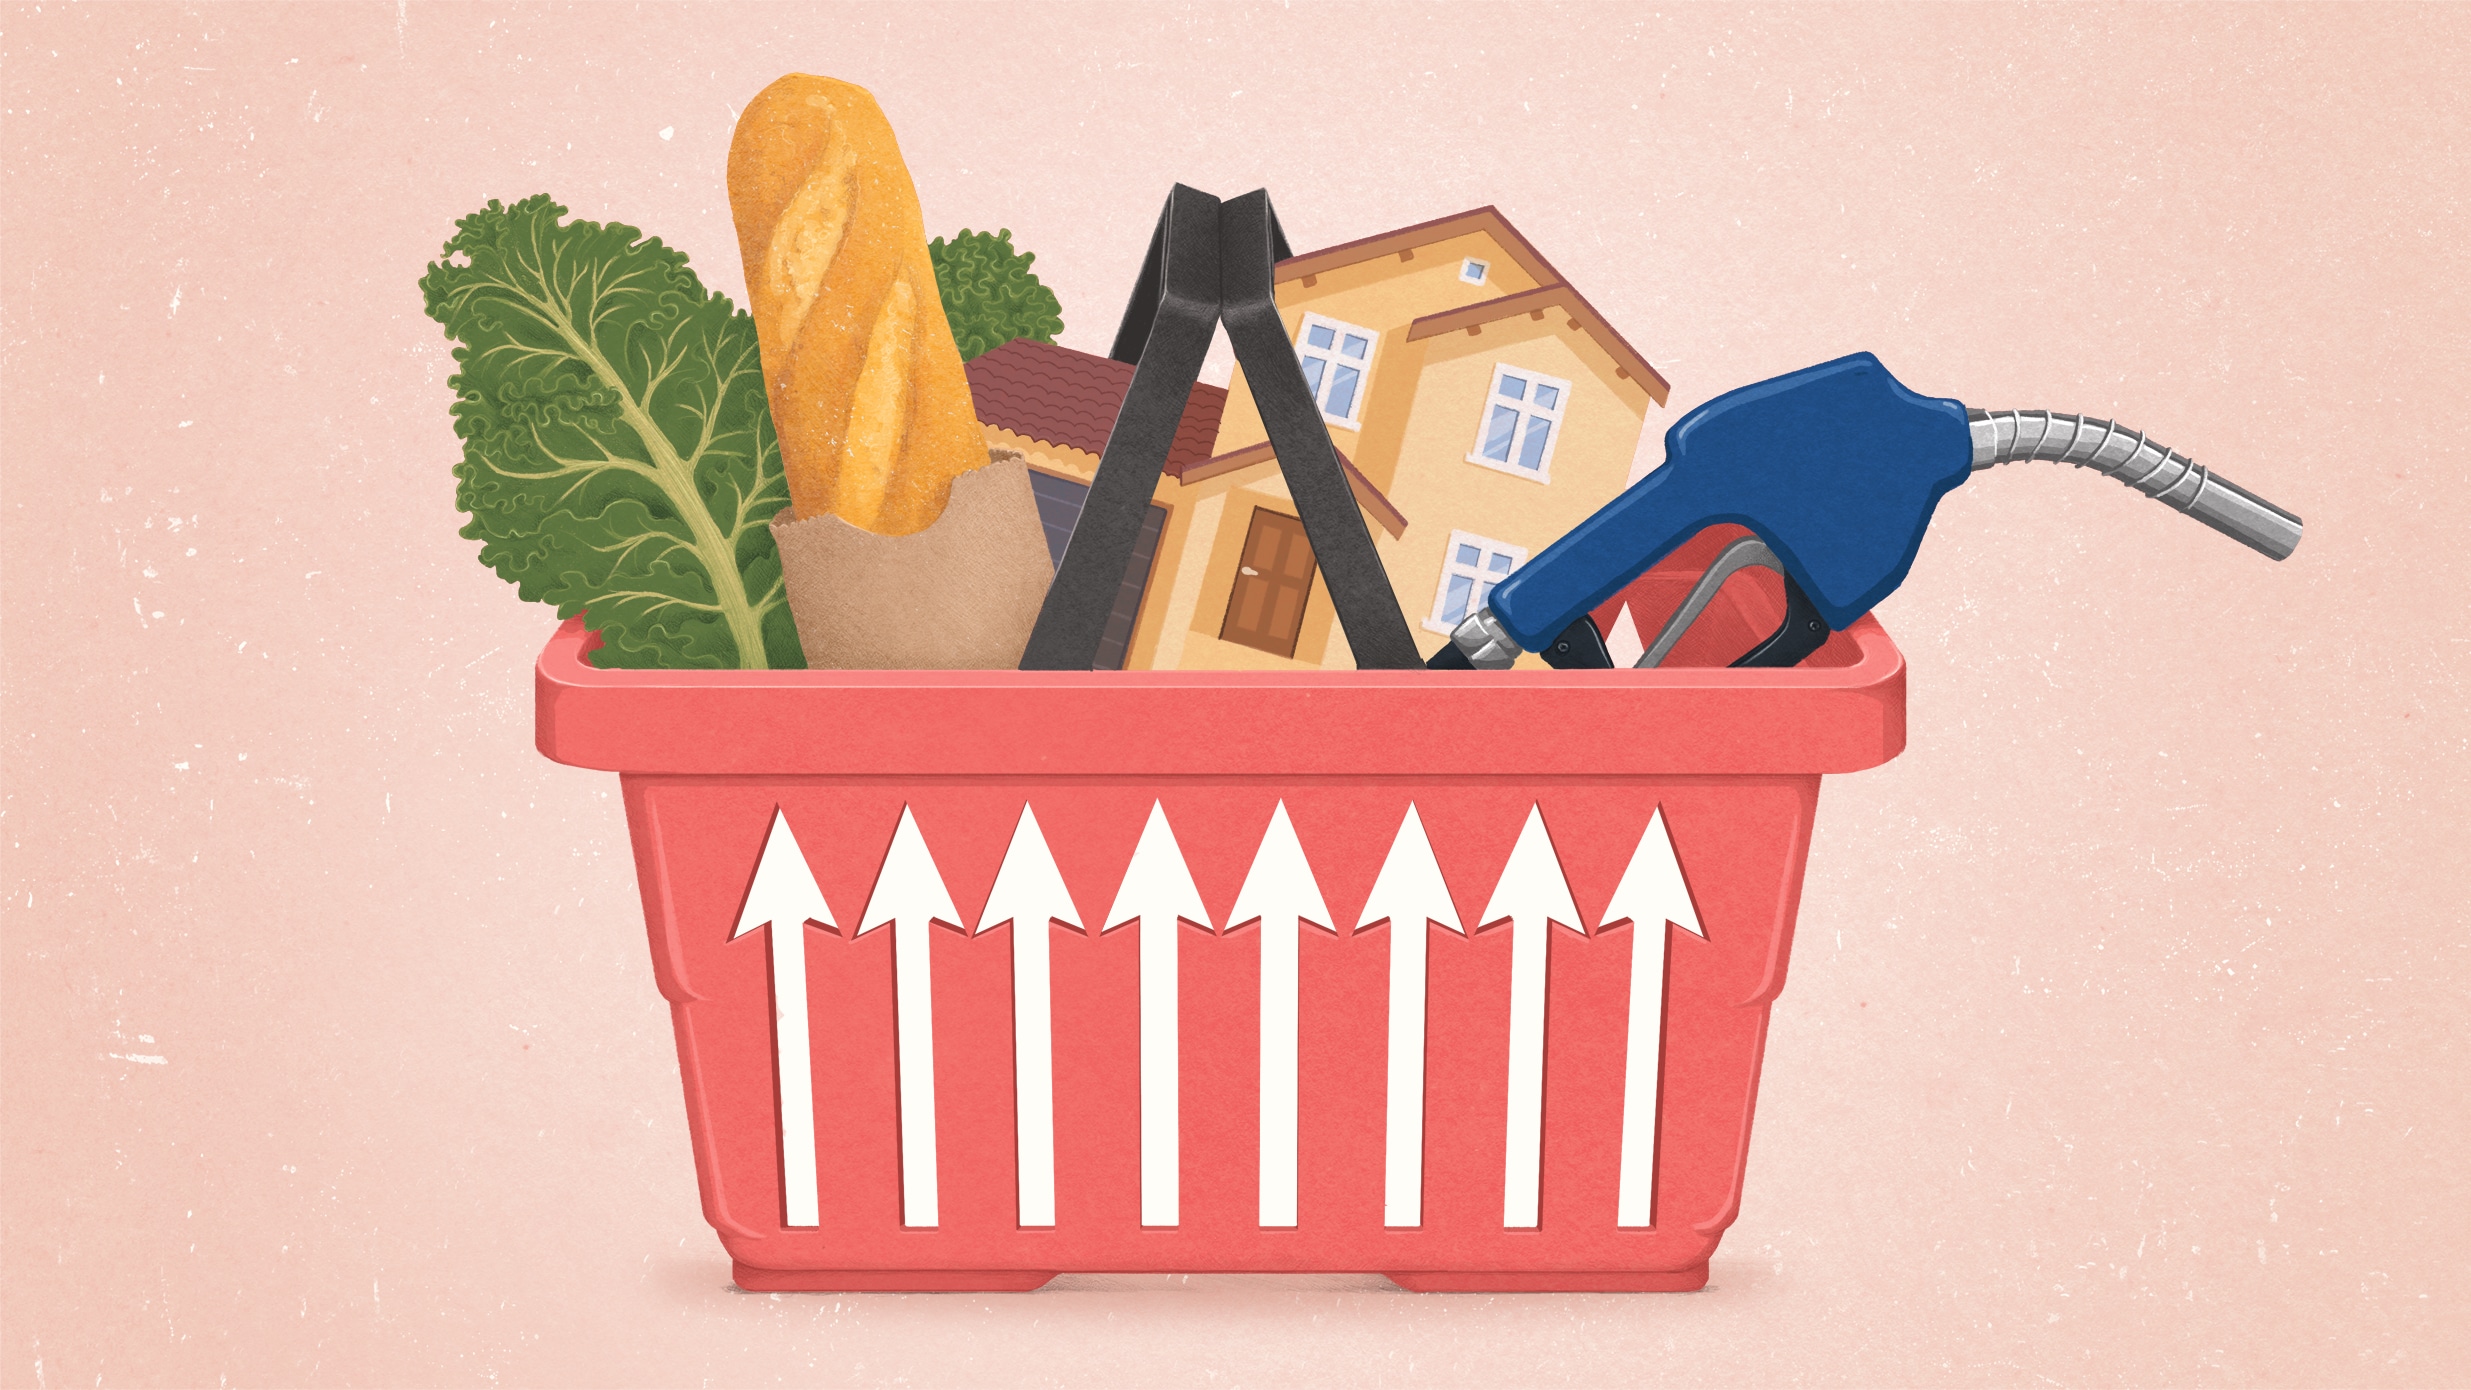 Illustration of a shopping basket filled with bread, kale, a gas pump nozzle, and a house. The grating on the sides of the basket are shaped like up arrows.